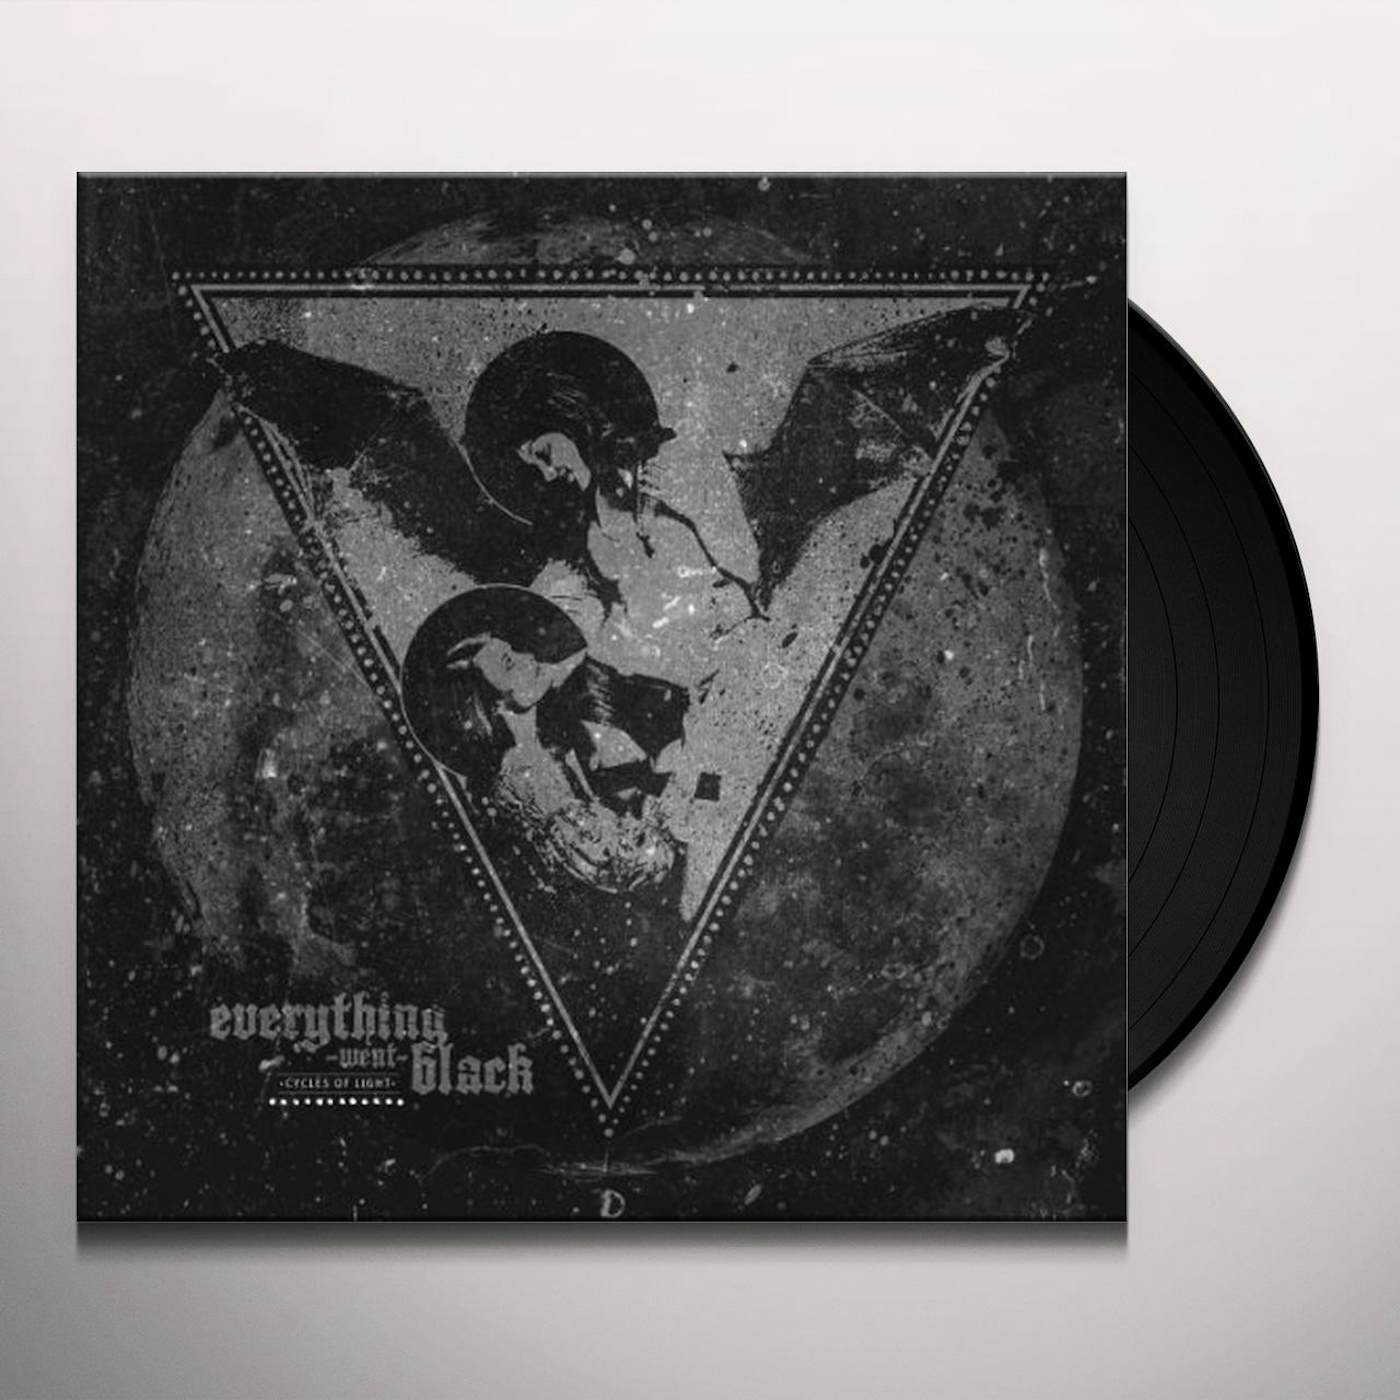 Everything Went Black Cycles of Light Vinyl Record